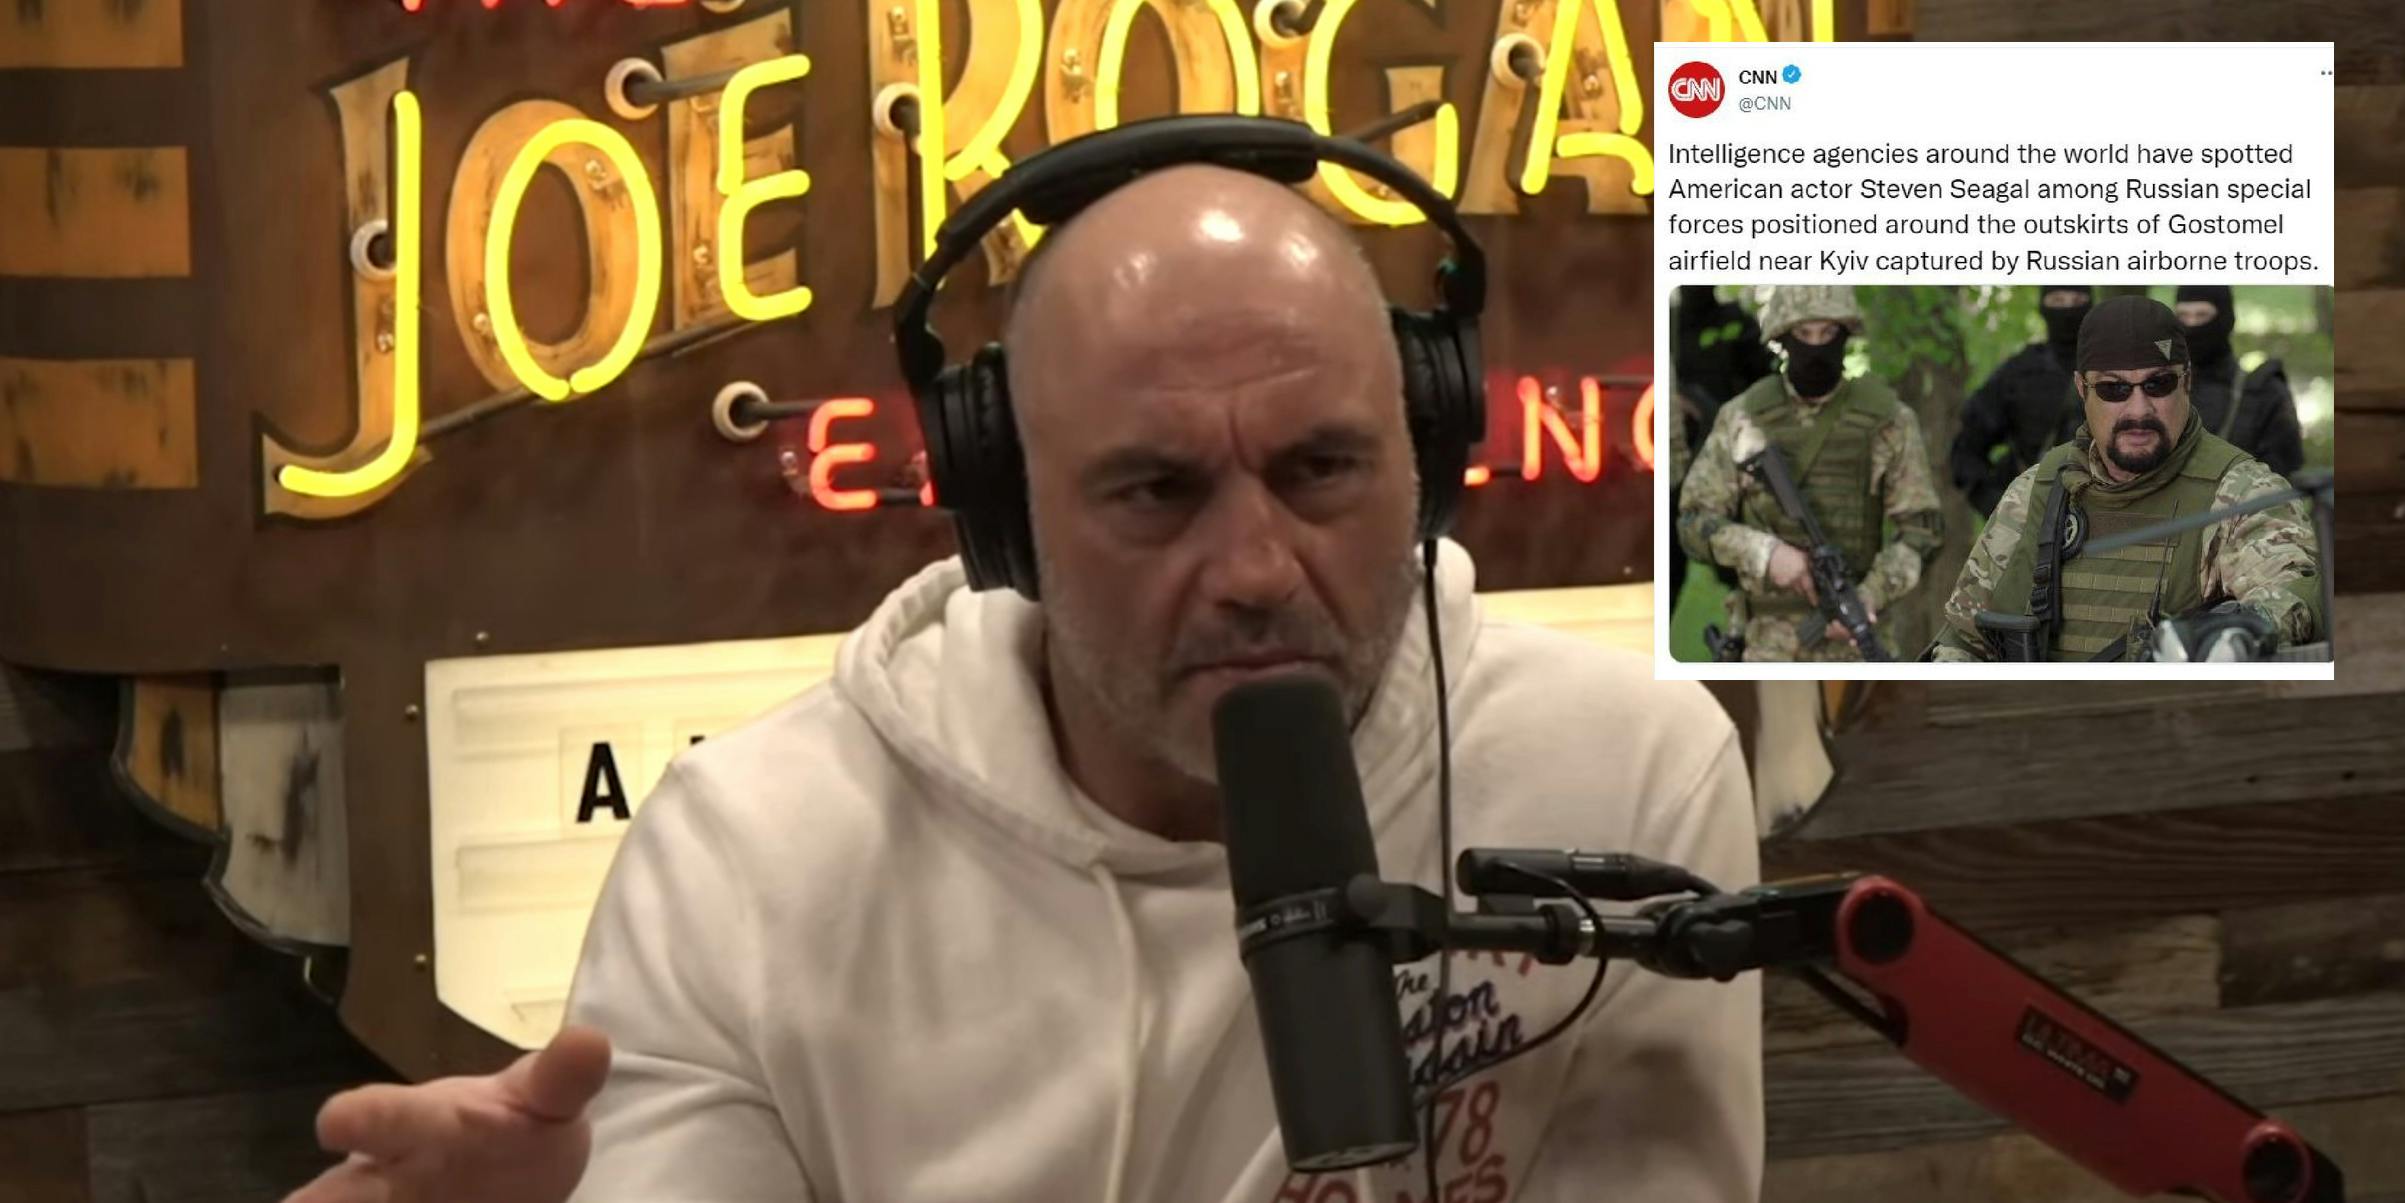 Joe Rogan talking on his podcast. Next to him is a screenshot of a fake CNN tweet that he shared saying Steven Seagal was among Russian special forces in Ukraine.